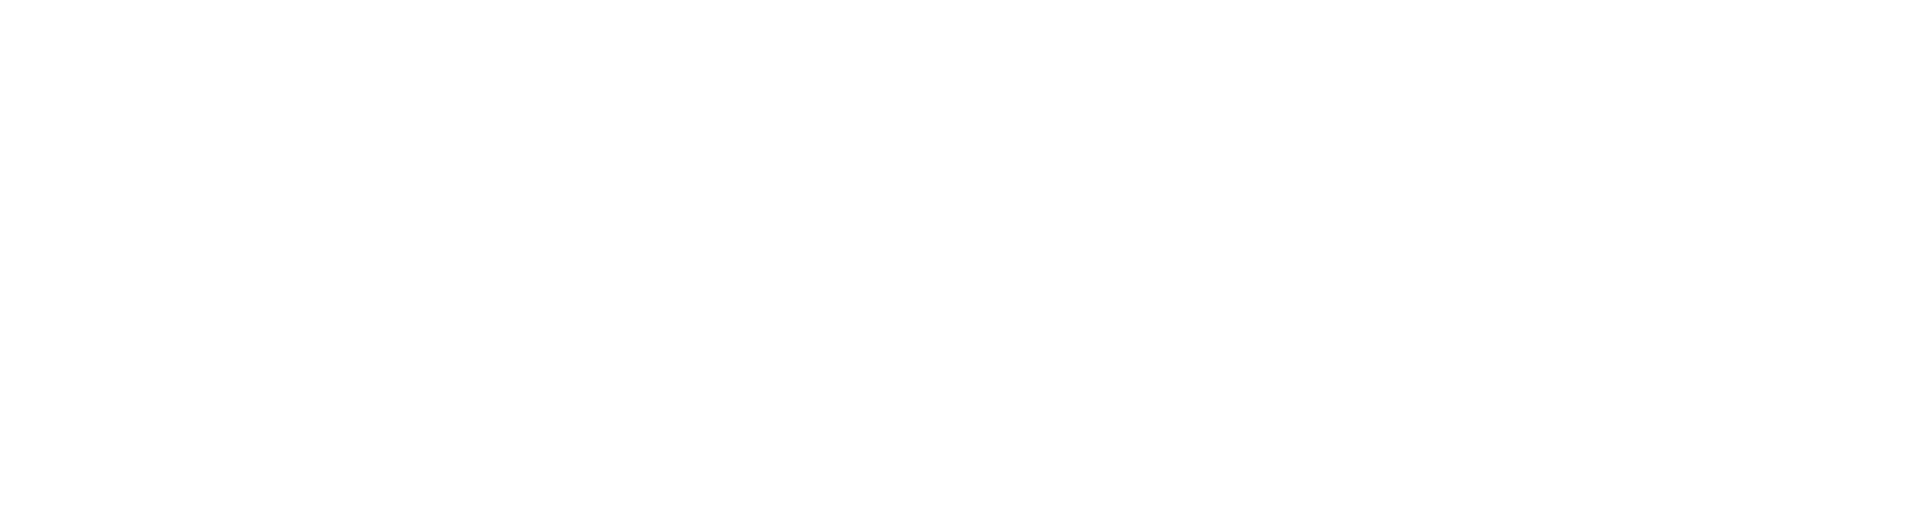 The Ministry of Education, Science, Research and Sport of the Slovak Republic